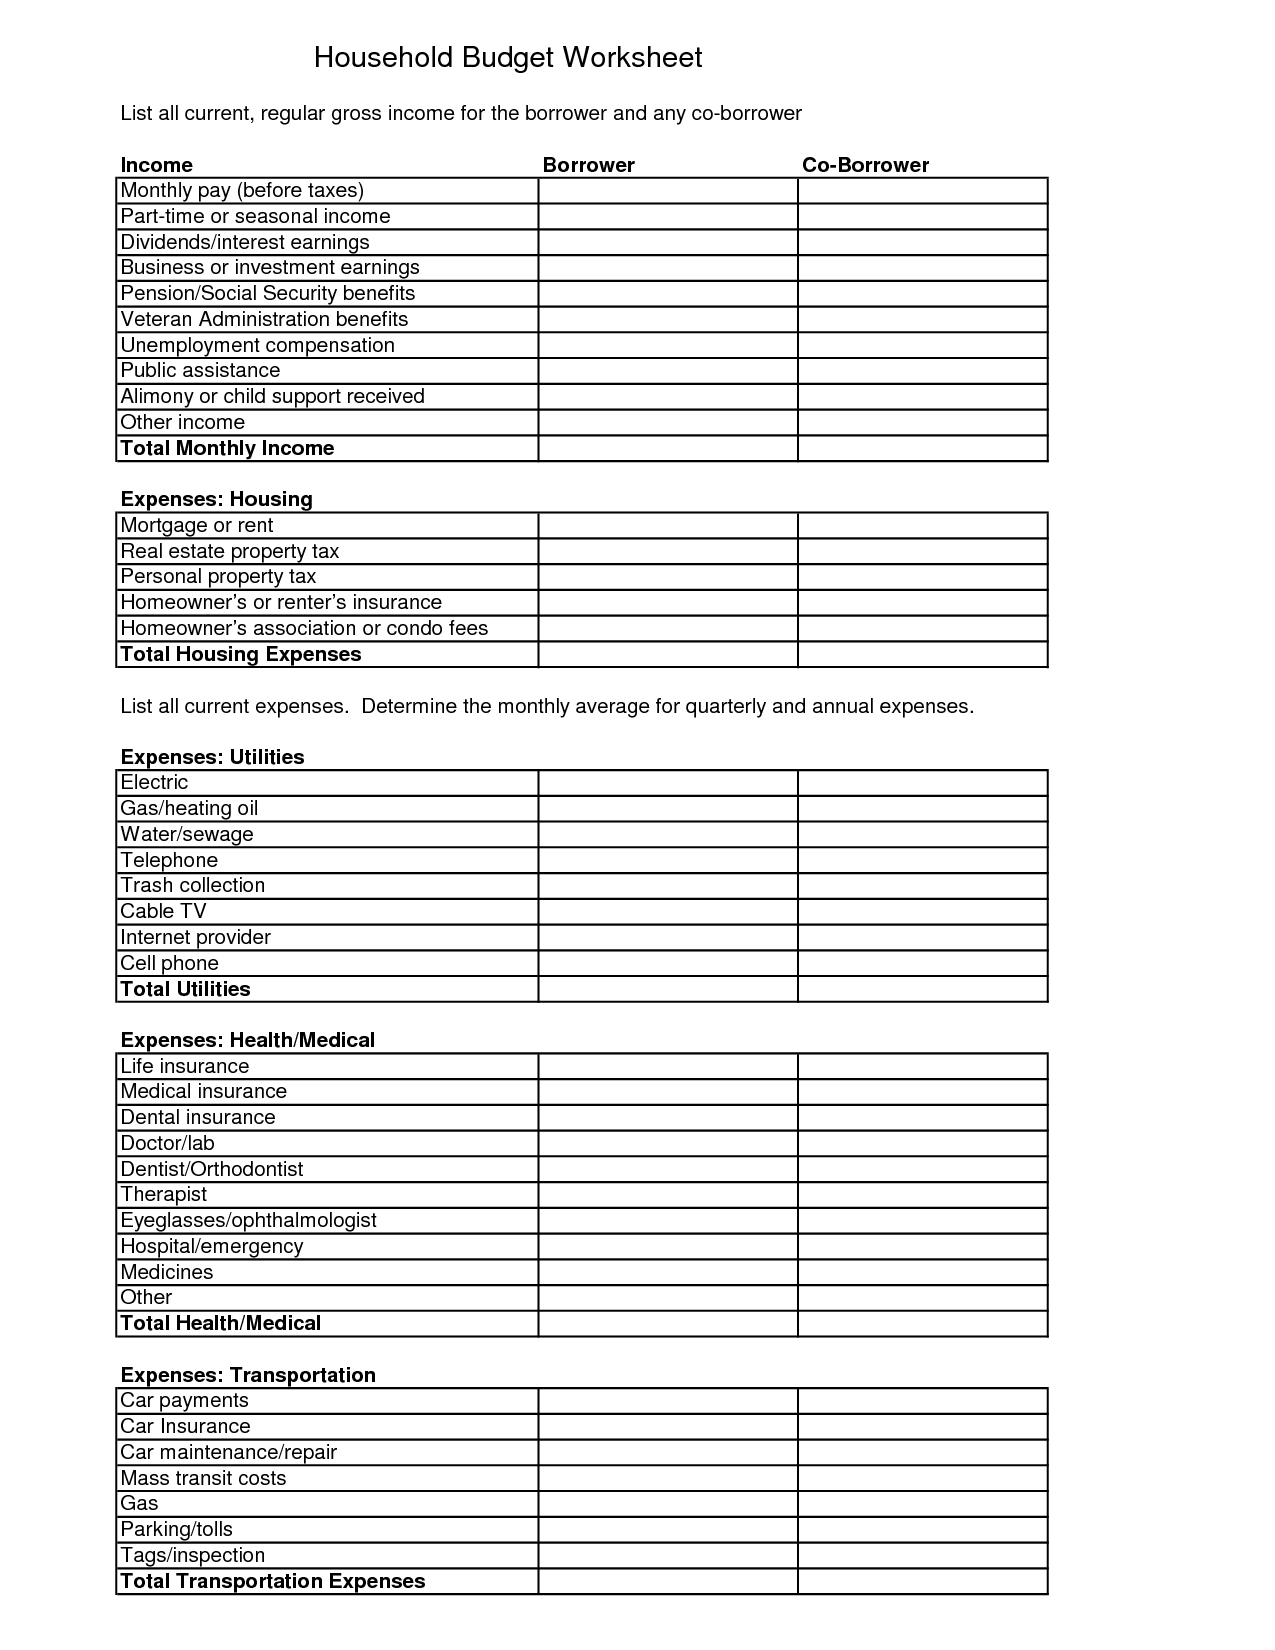 12-best-images-of-home-expense-worksheet-blank-monthly-budget-spreadsheet-monthly-expense